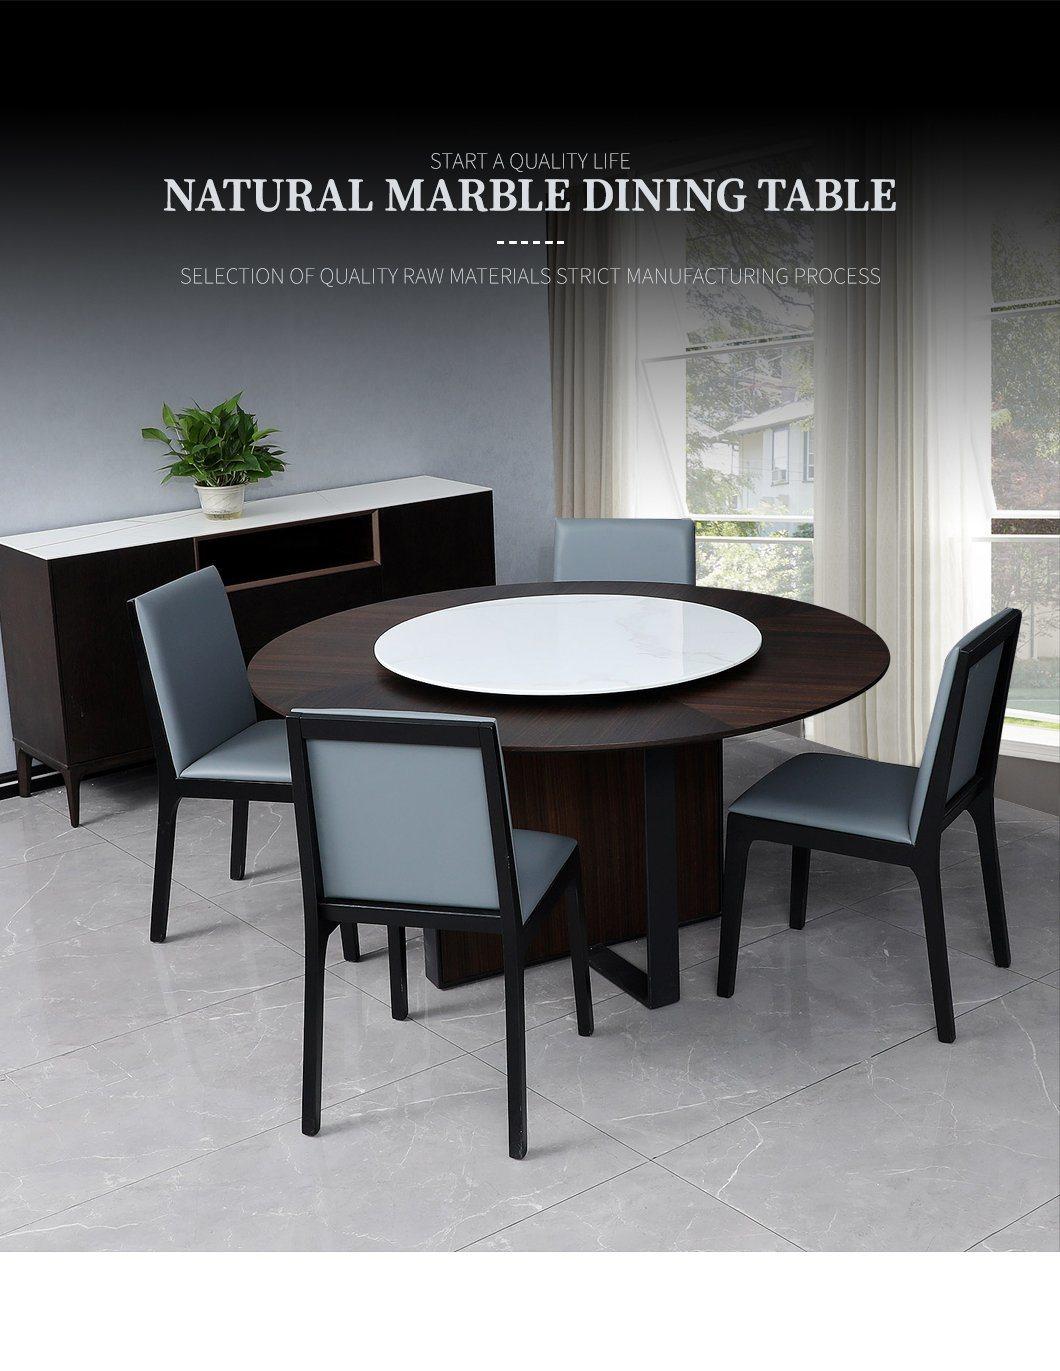 New Italian Solid Wood Frame Round Dining Table Set